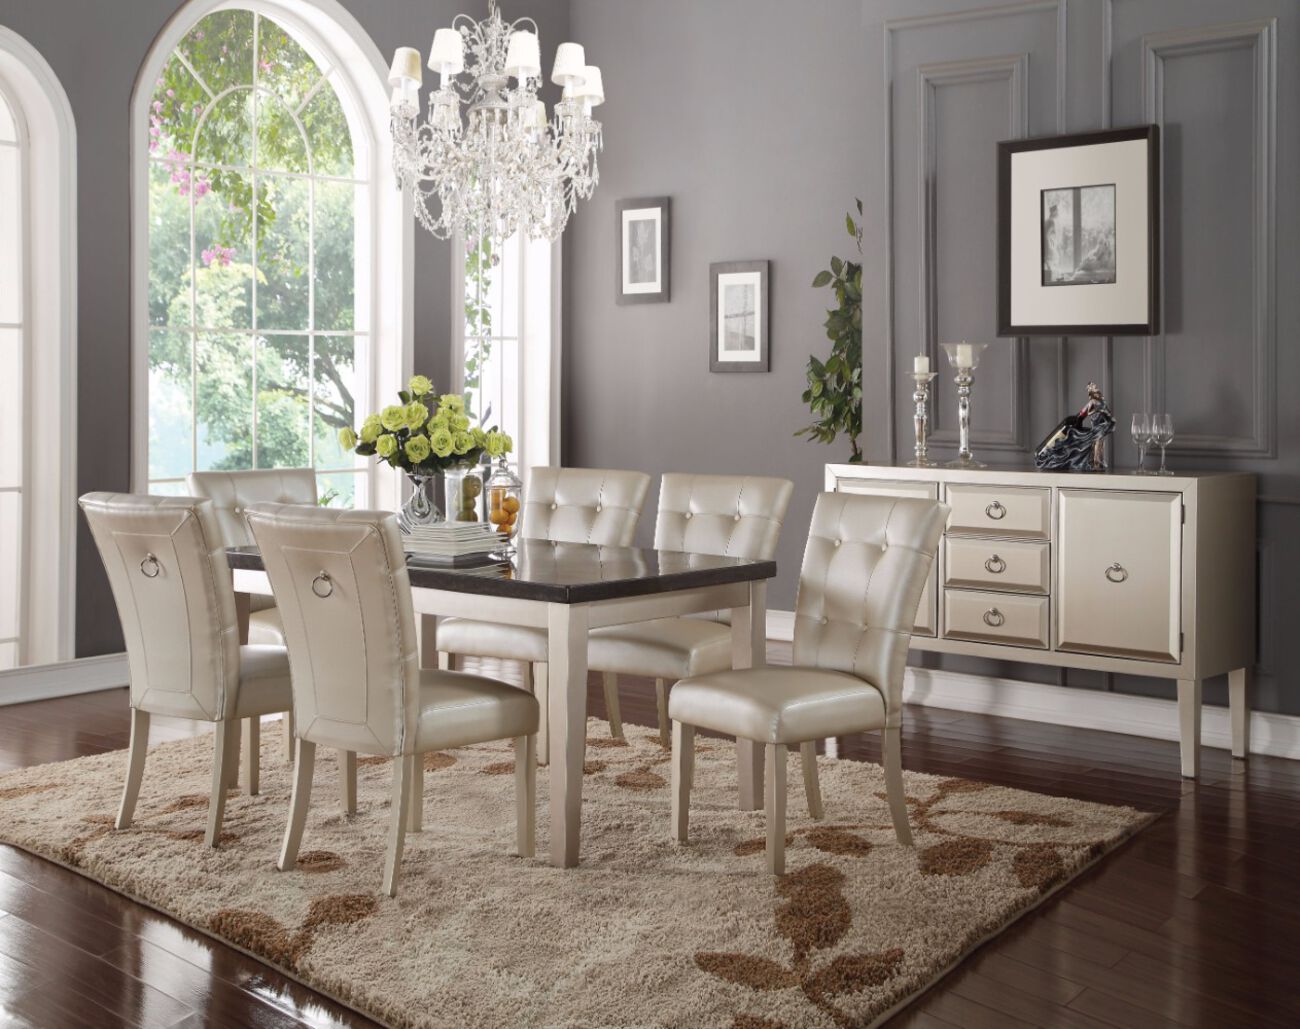 Charming Dining Table With Black Top, White